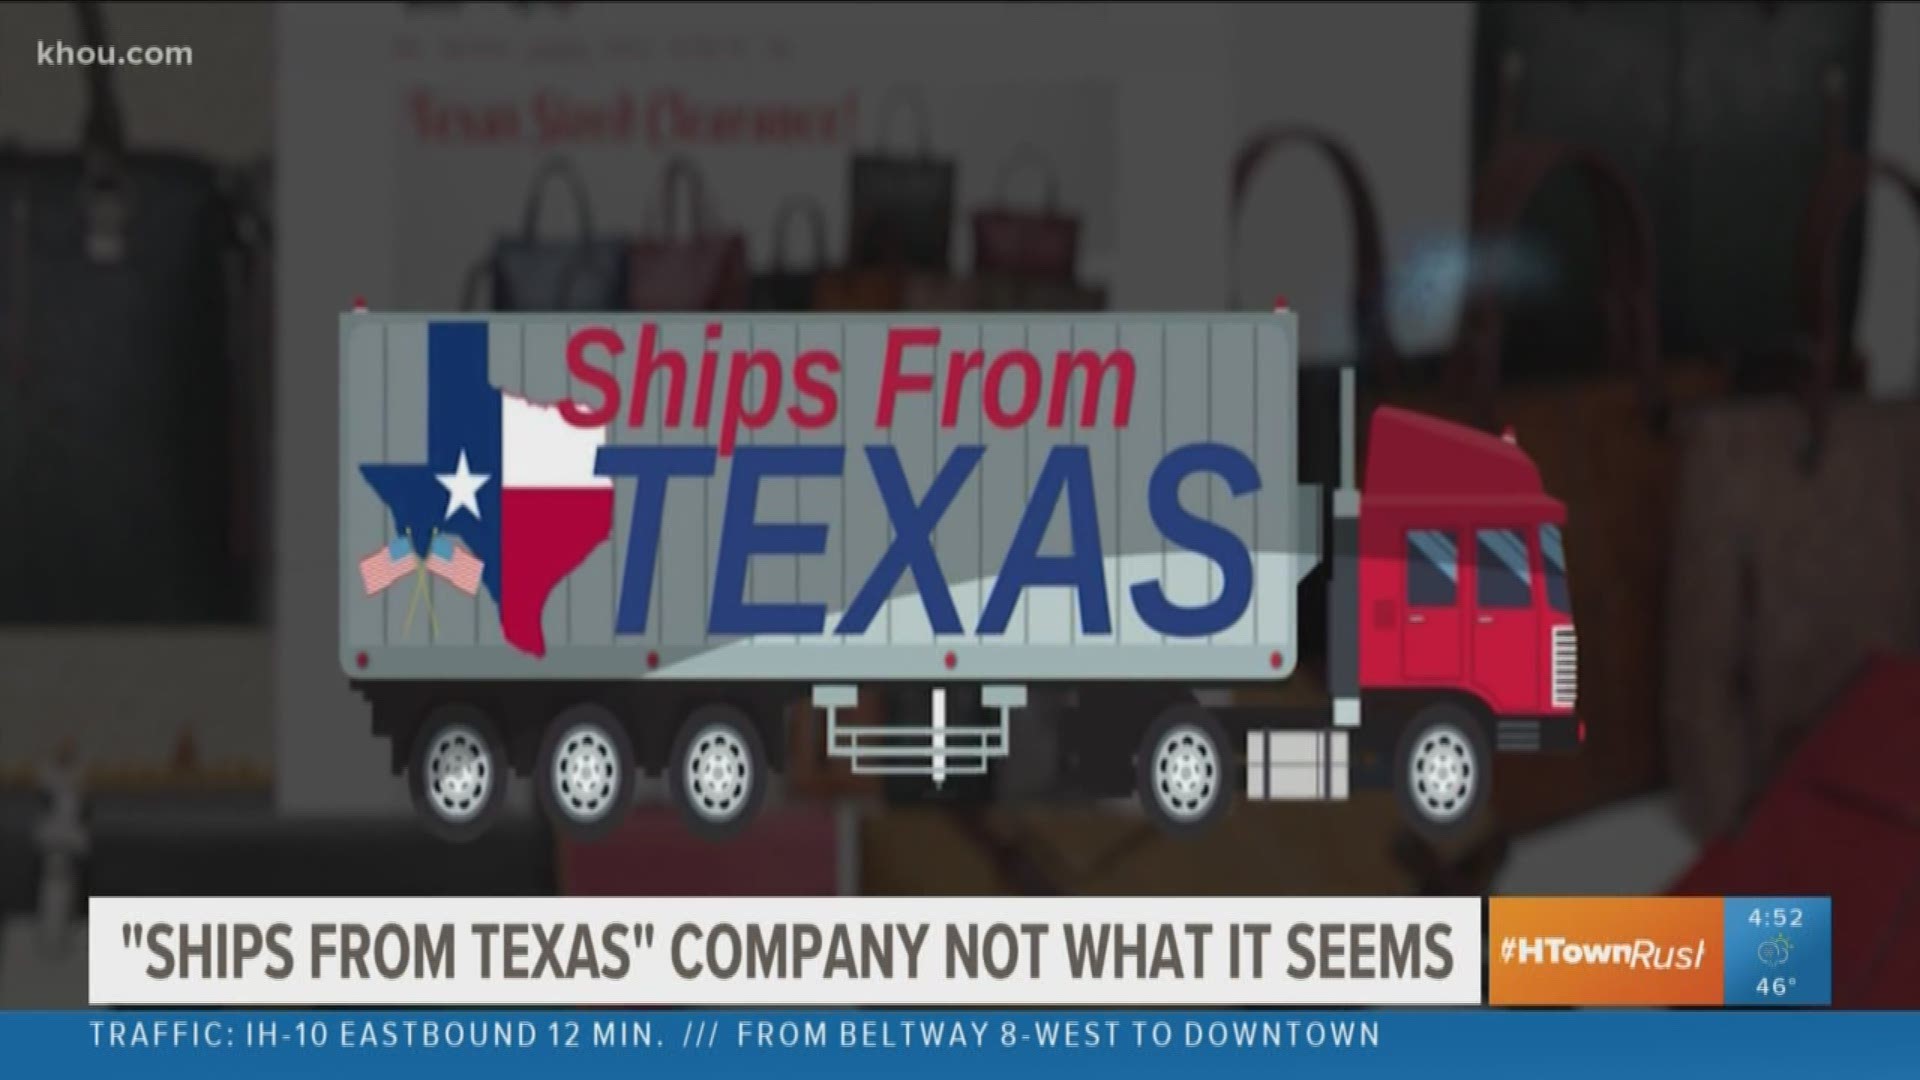 It goes without saying—Texans love their state. But scores of consumers claim one online retailer is taking advantage of that Texas pride, and taking them for a ride.